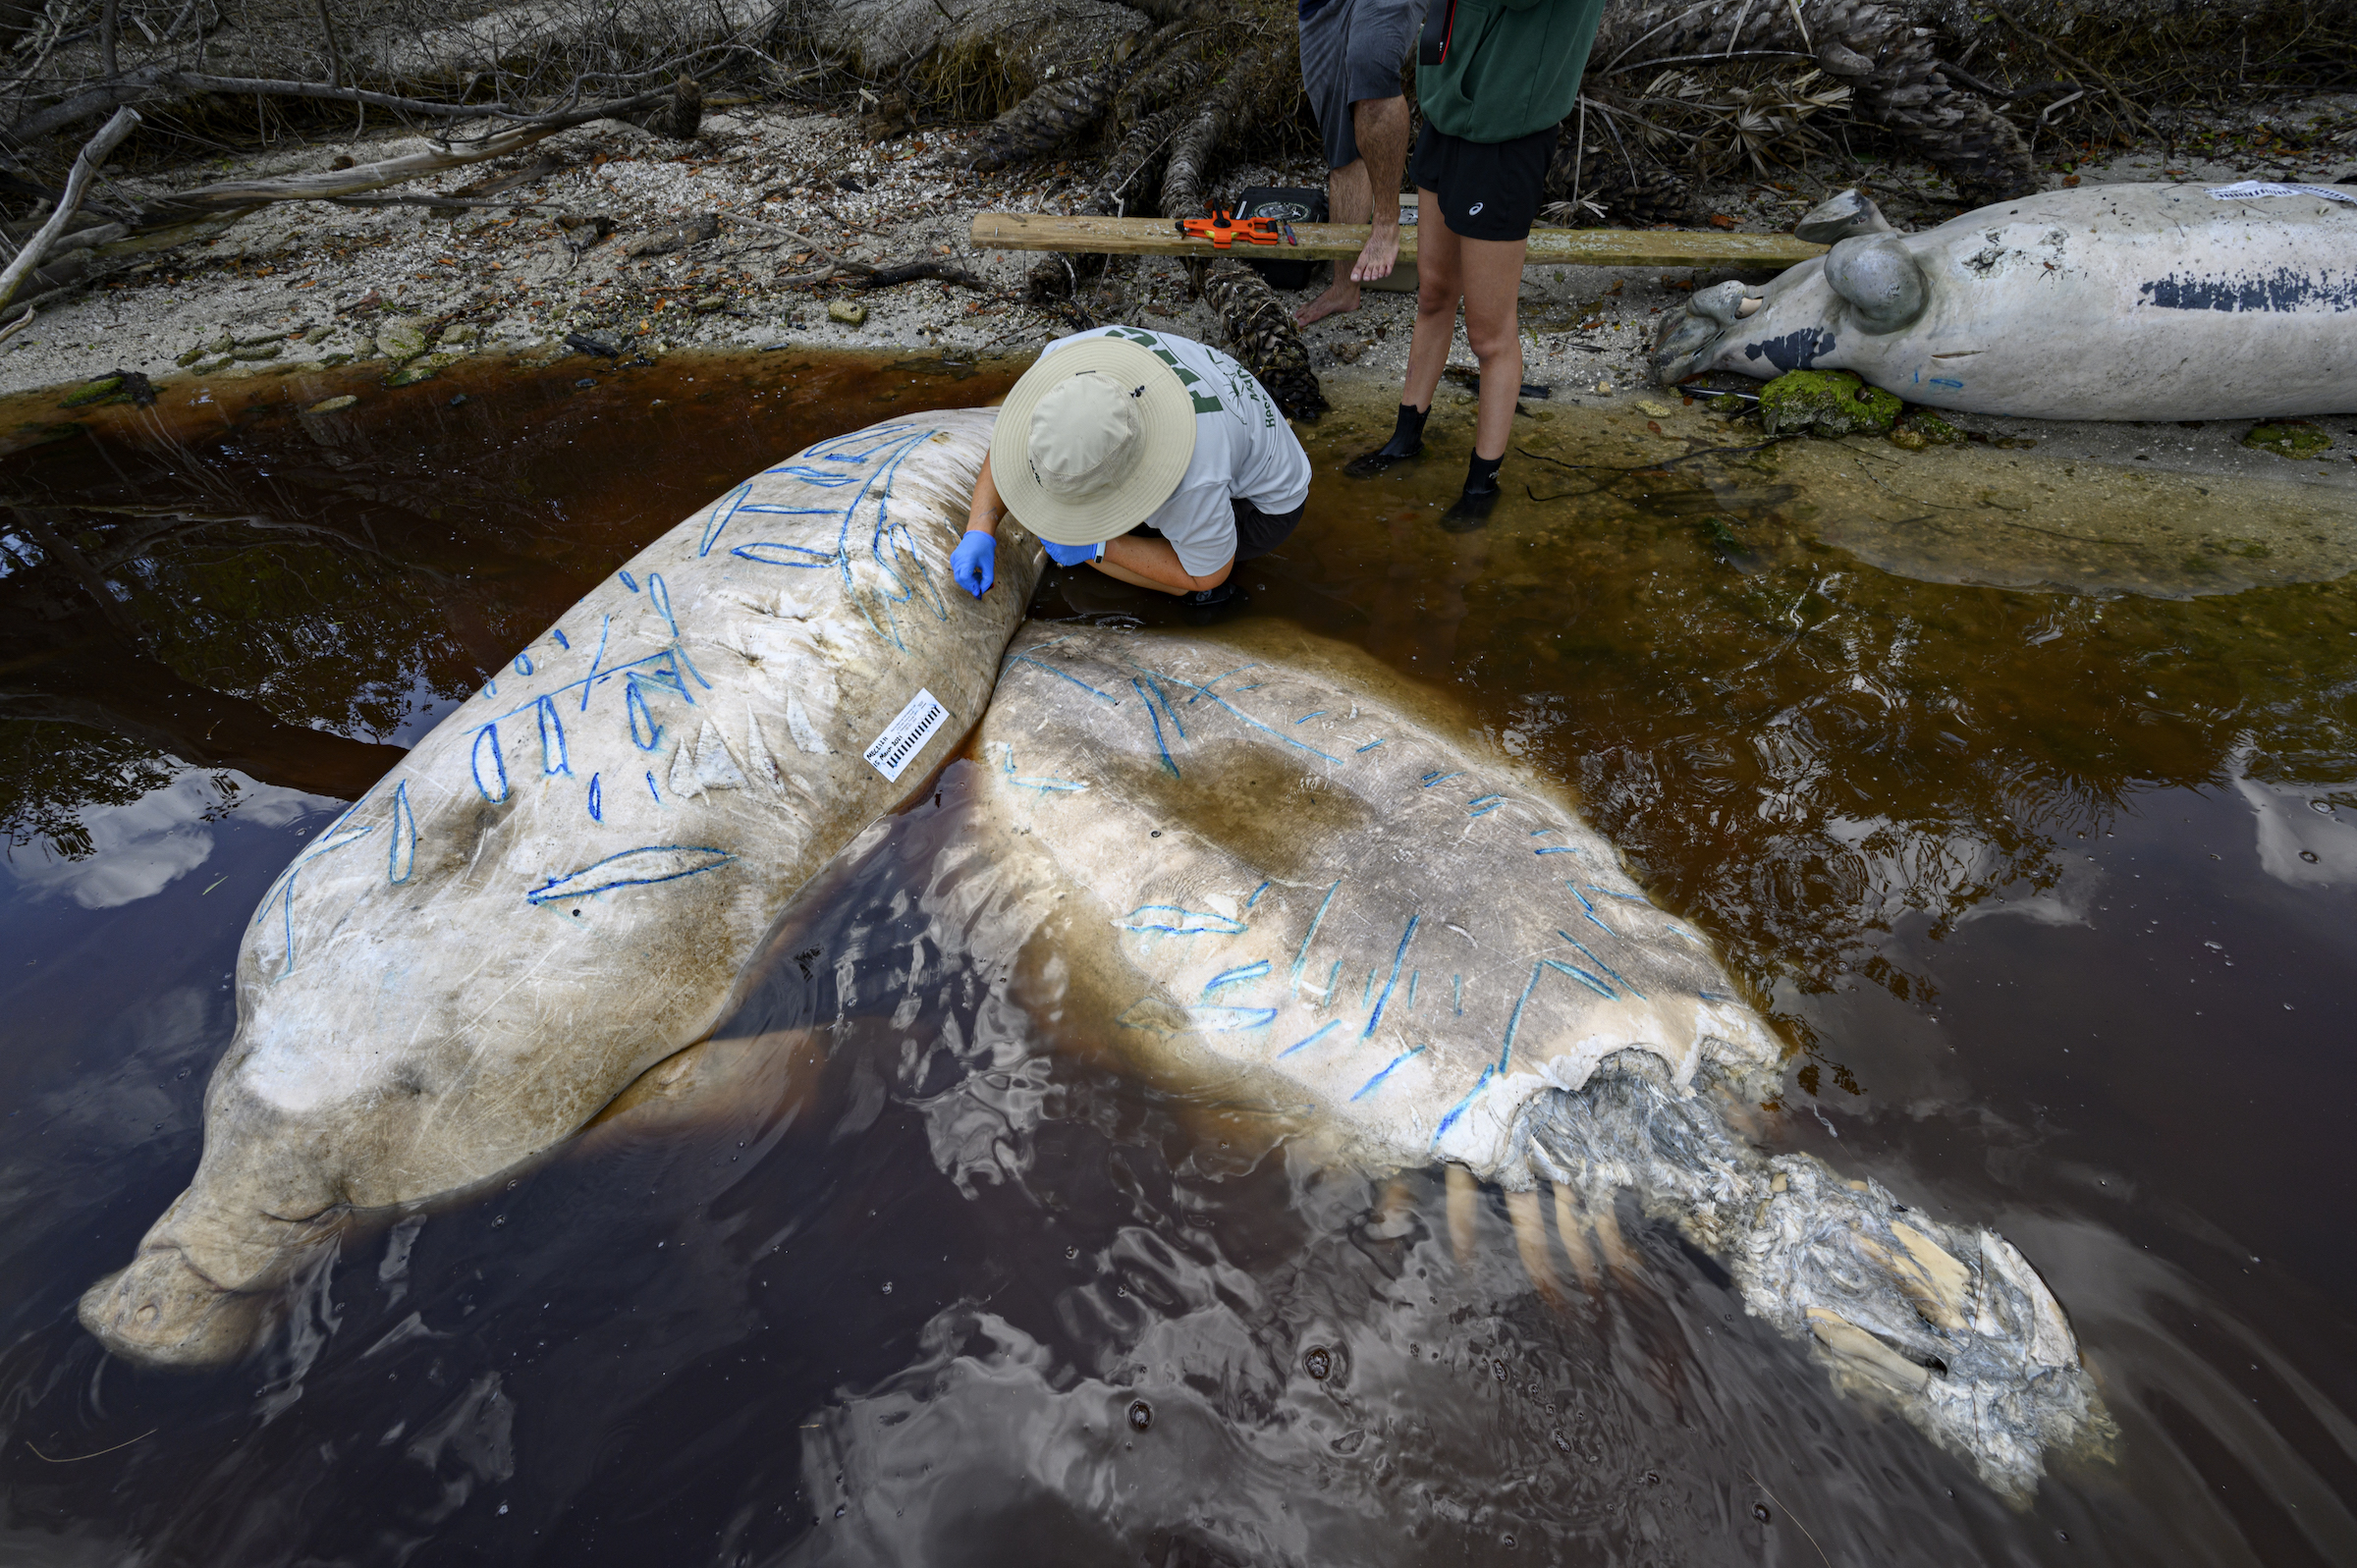 Florida Fish and Wildlife Conservation Commission biologists outline propeller scars during a field exam of dead manatees on March 15, 2021 in Indian River Lagoon, the epicenter of a record-shattering manatee die off that year. Unlike previous massive manatee die offs, which were caused by toxic red tide, this die off is caused by the pollution-fueled collapse of seagrass beds, an important manatee food source. (Jason Gulley)